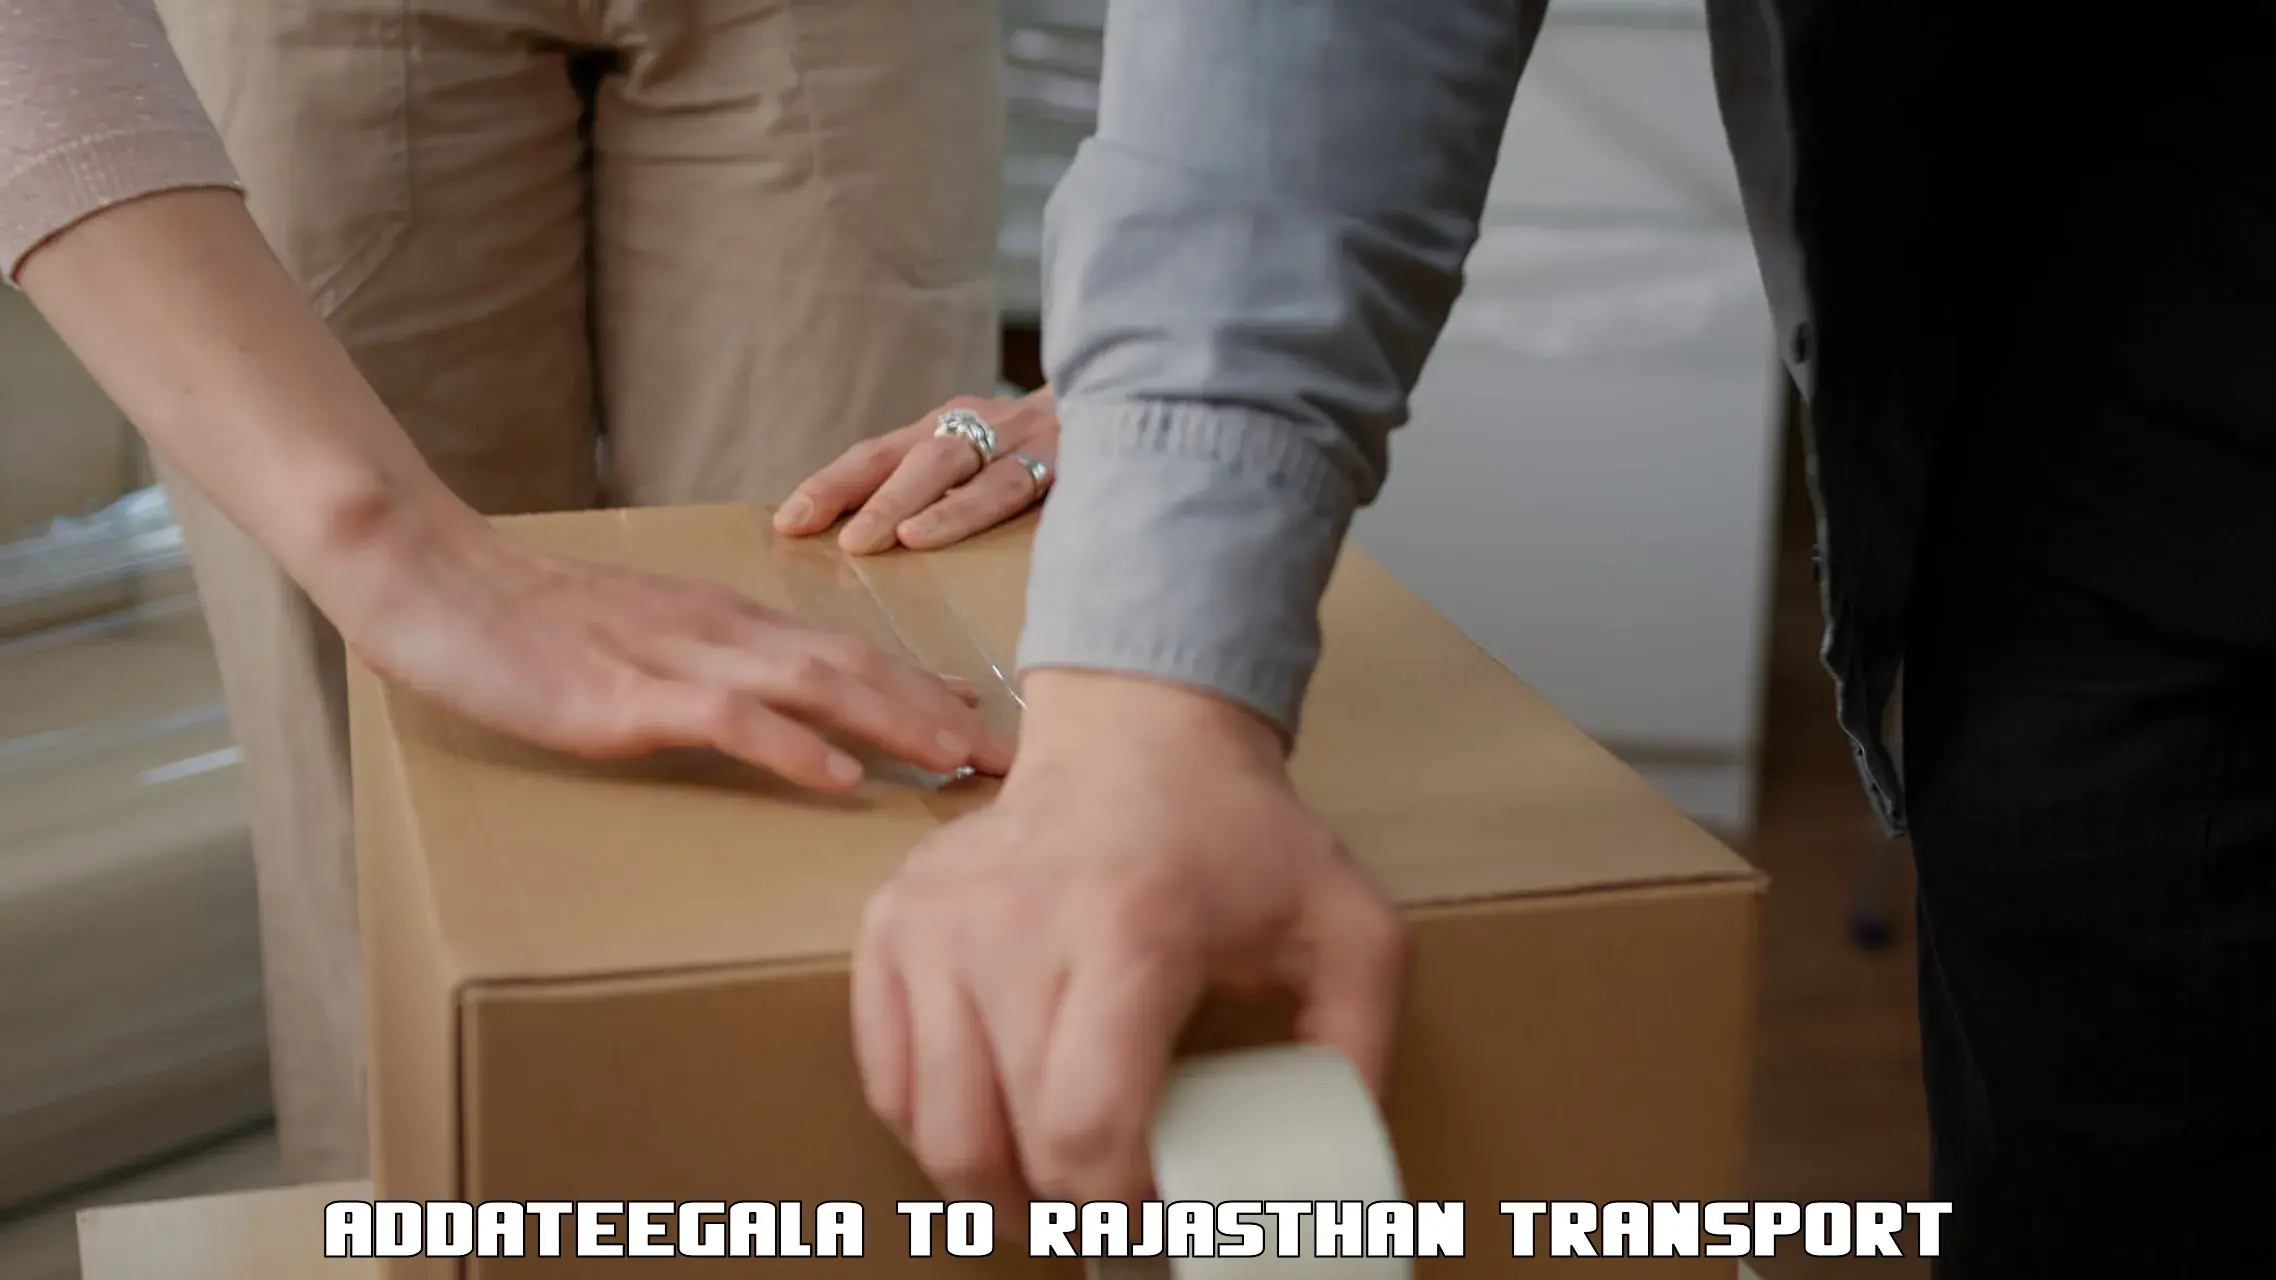 Land transport services Addateegala to Rajasthan